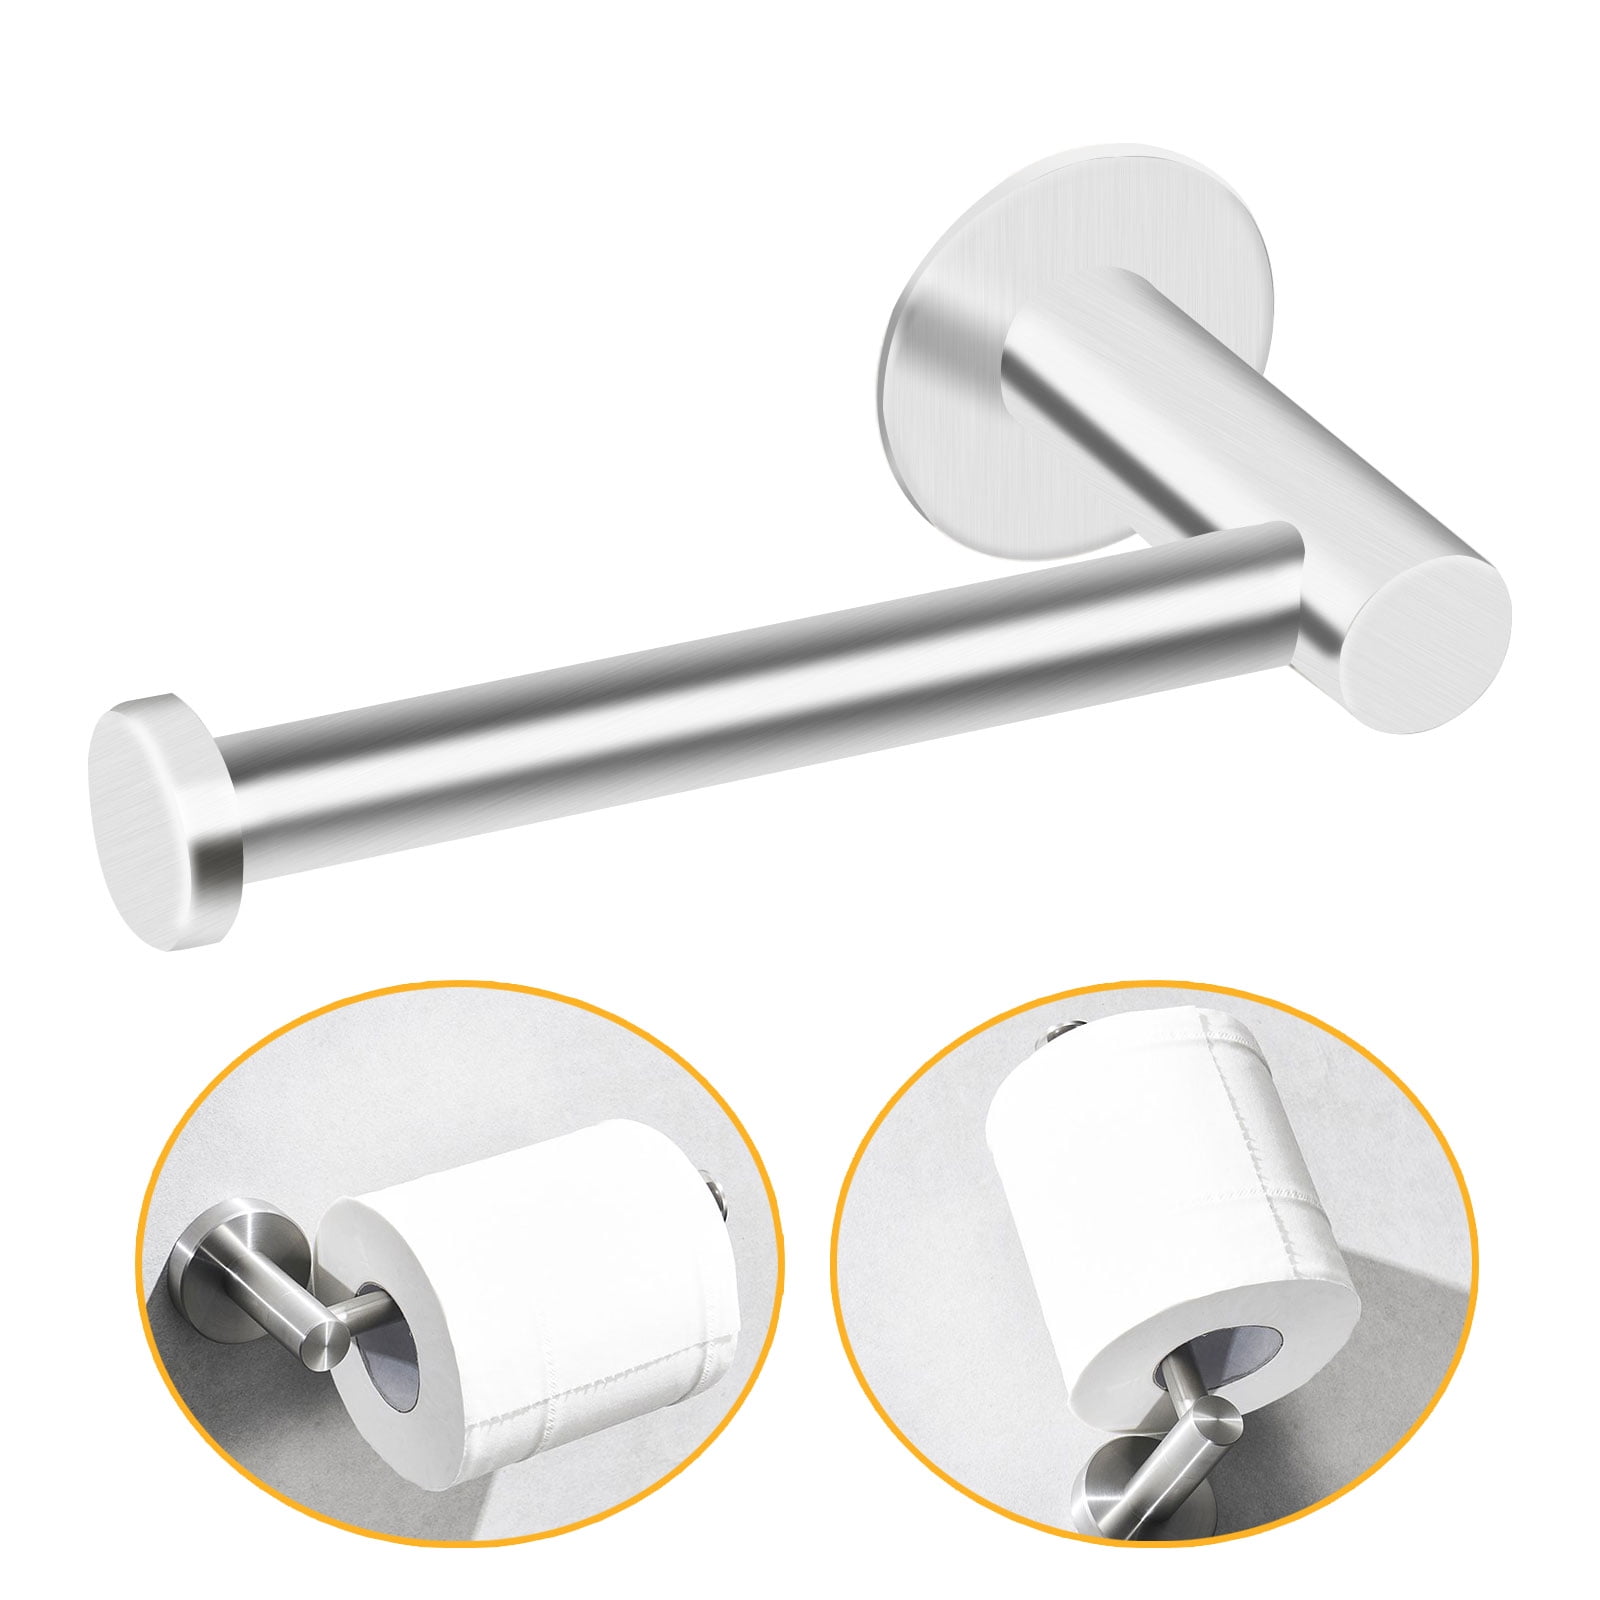 Polished Stainless Steel Toilet Roll Holder Self Adhesive Stick on Chrome Finish 